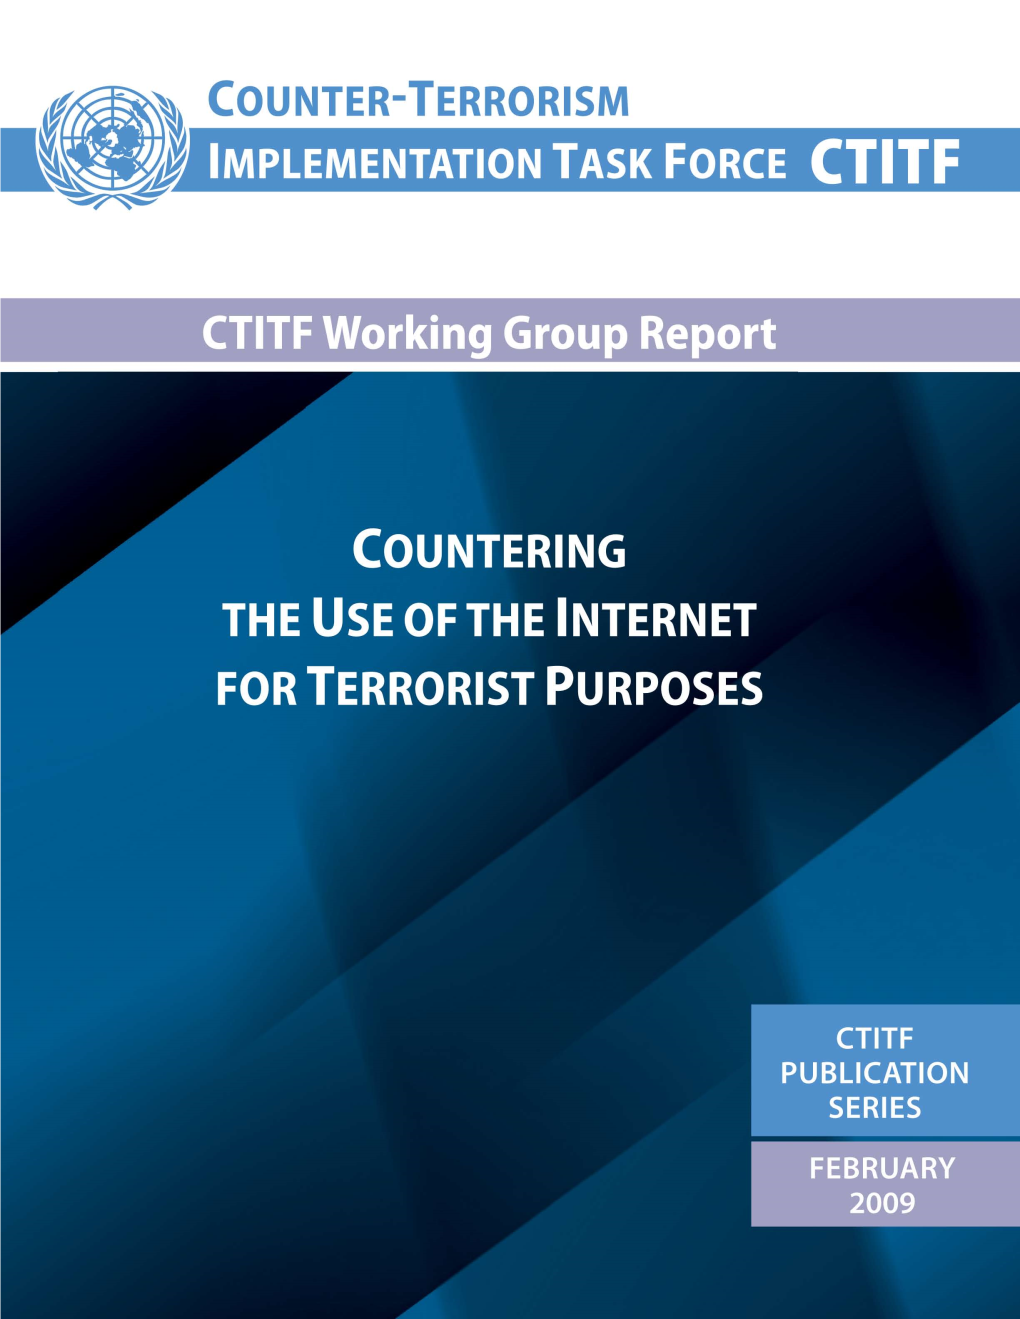 CTITF Working Group Report 2009